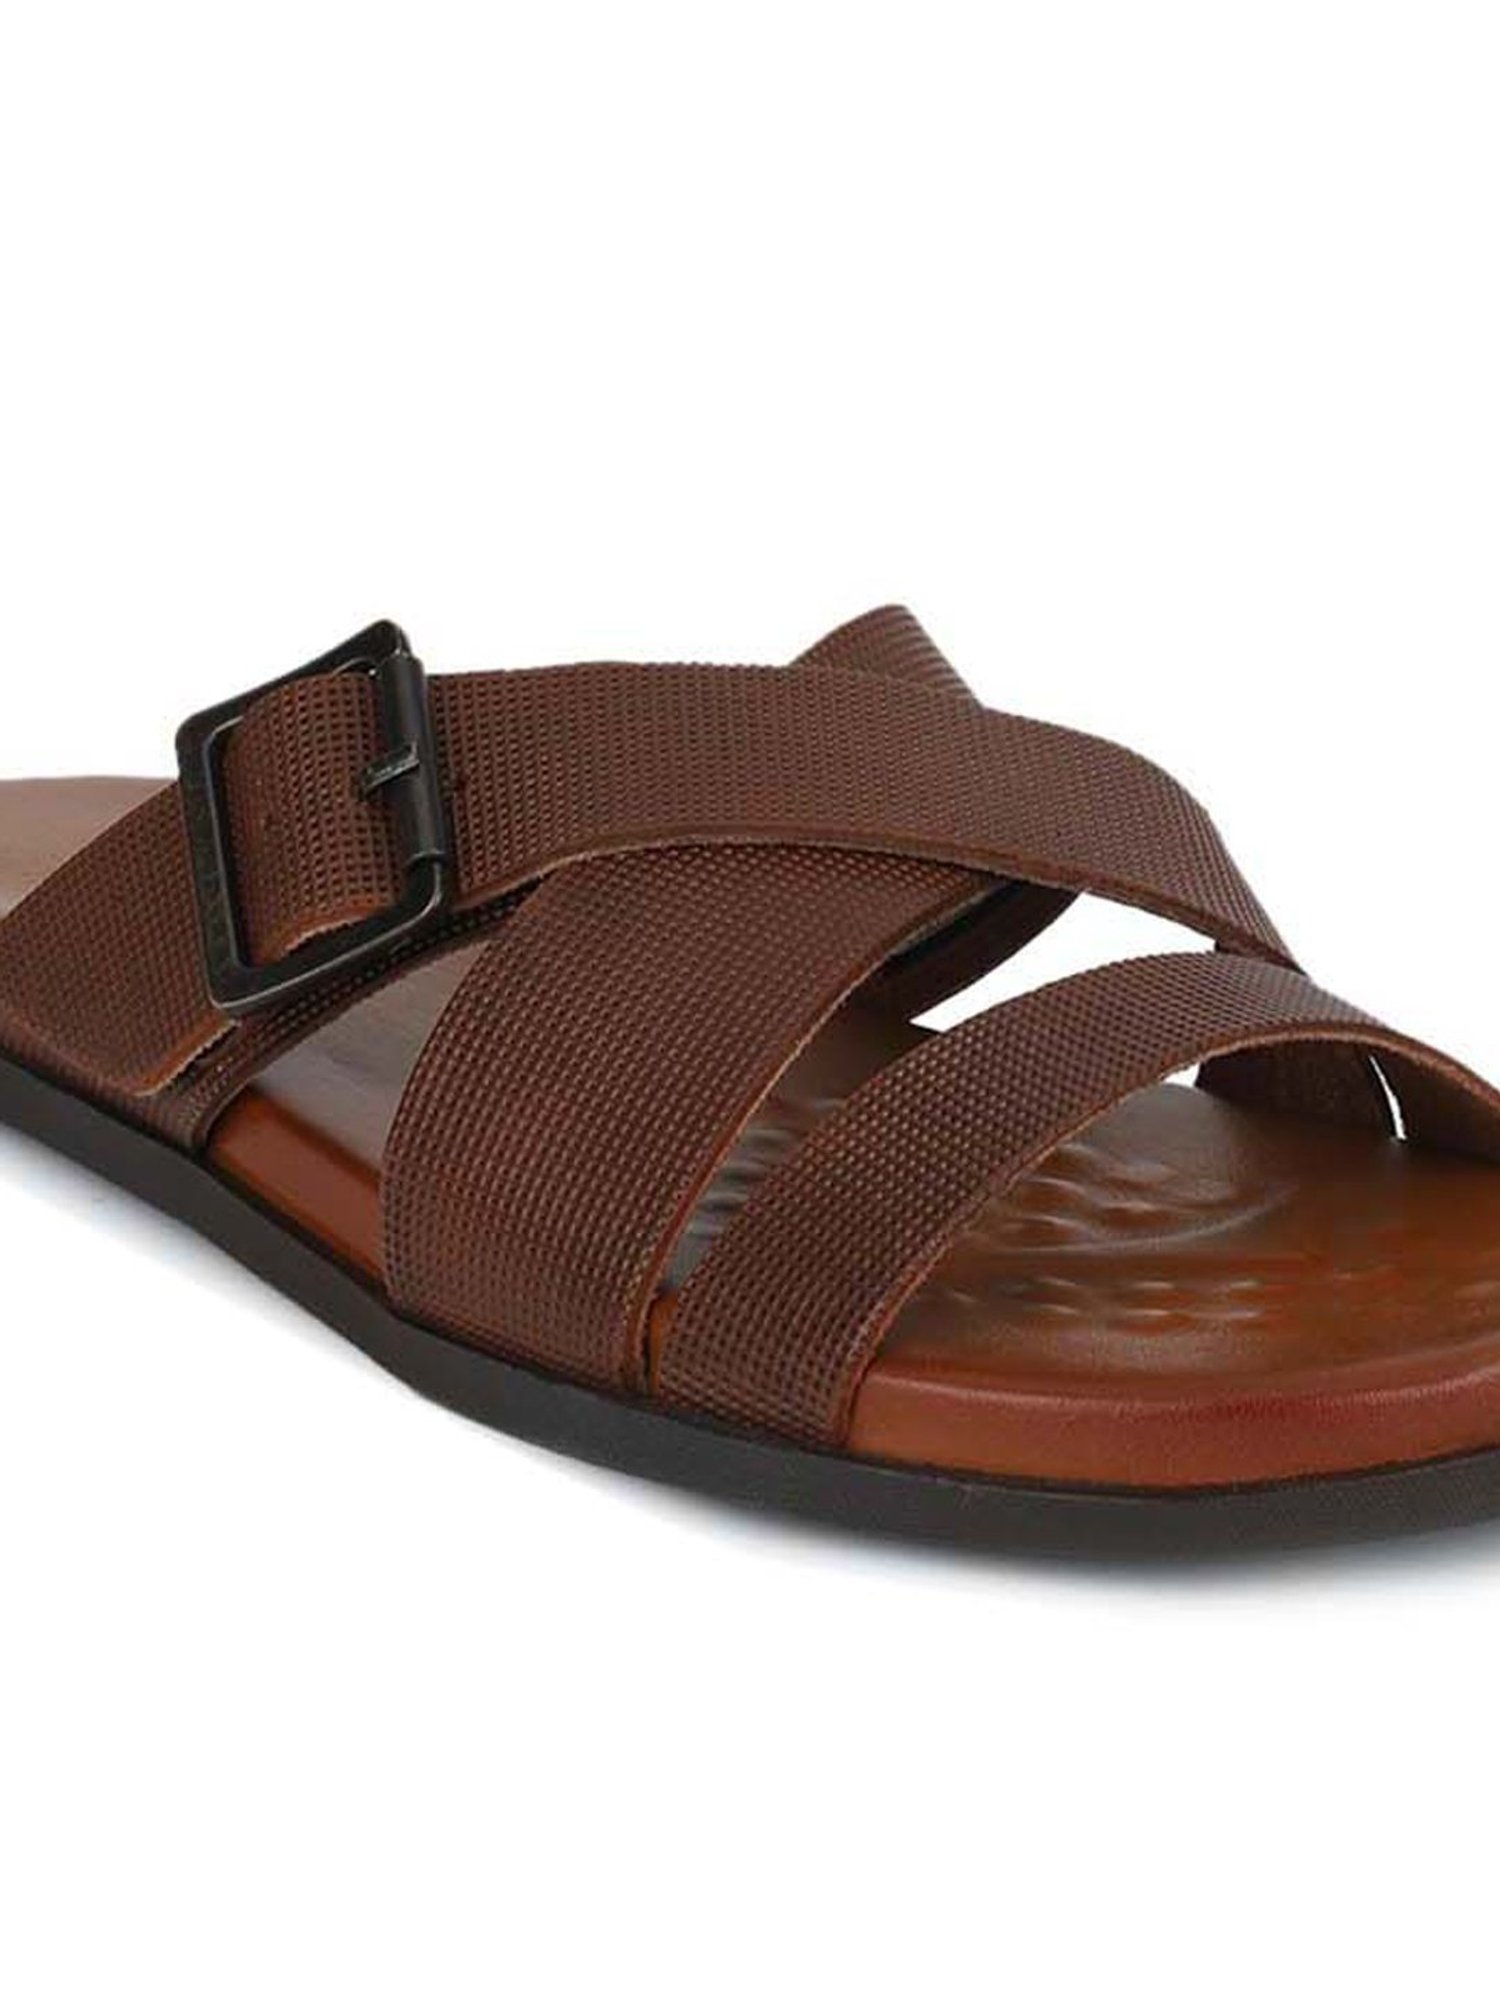 Are Sandals For Men Stylish? | Wear Sandals And Look Attractive